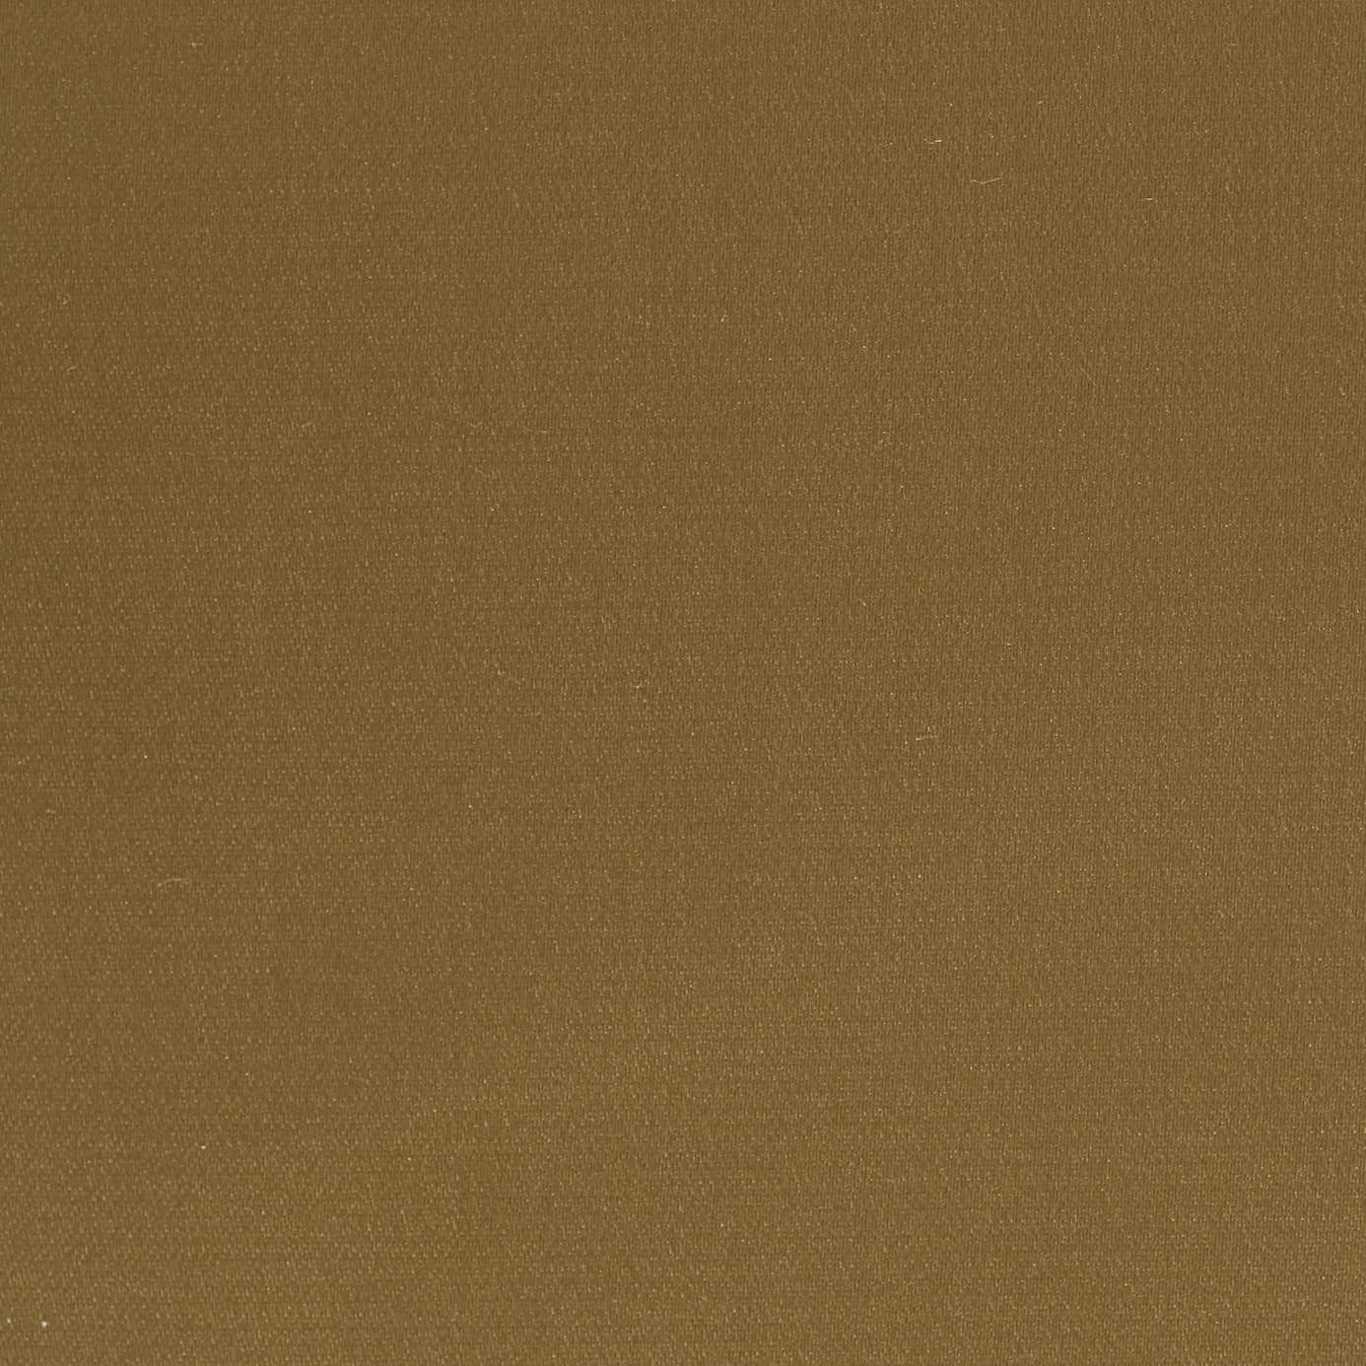 Electron Fabric by Harlequin - HPOL440432 - Buff